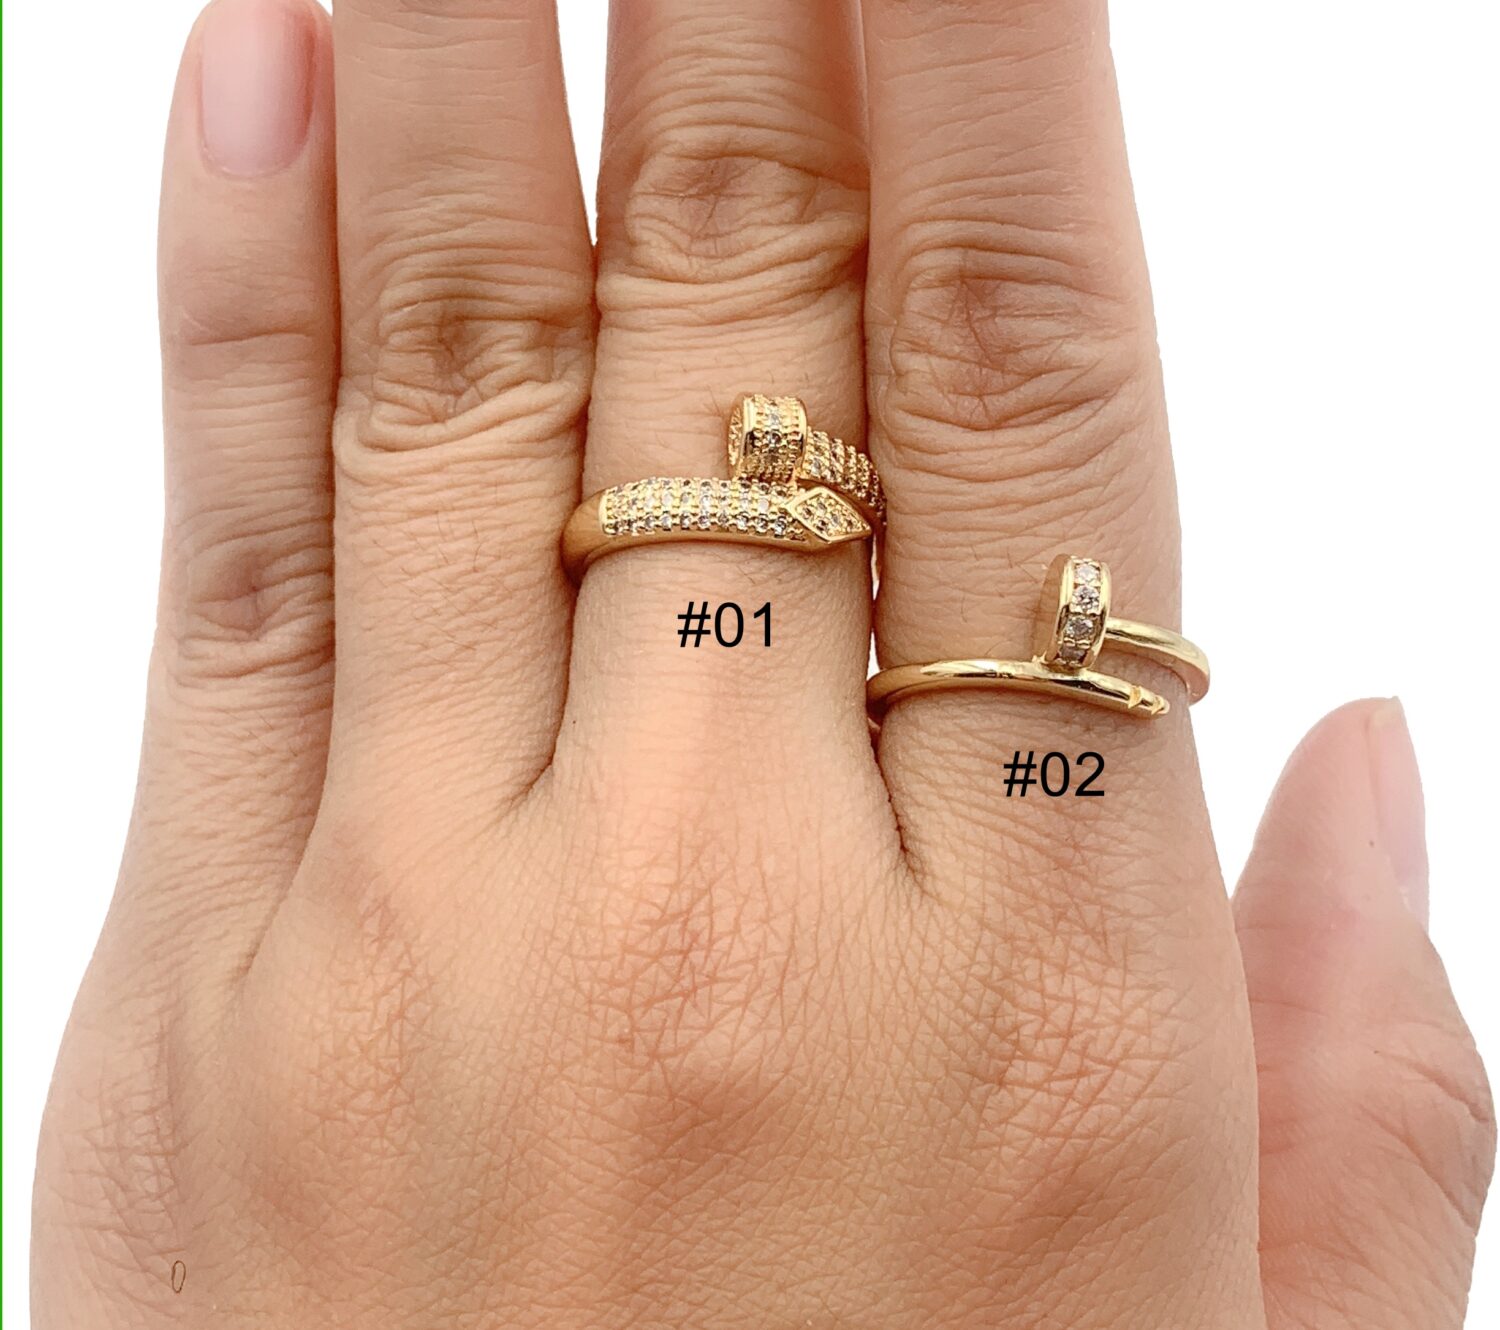 Nail rings set in gold | Nail ring, Jewelry, Rings